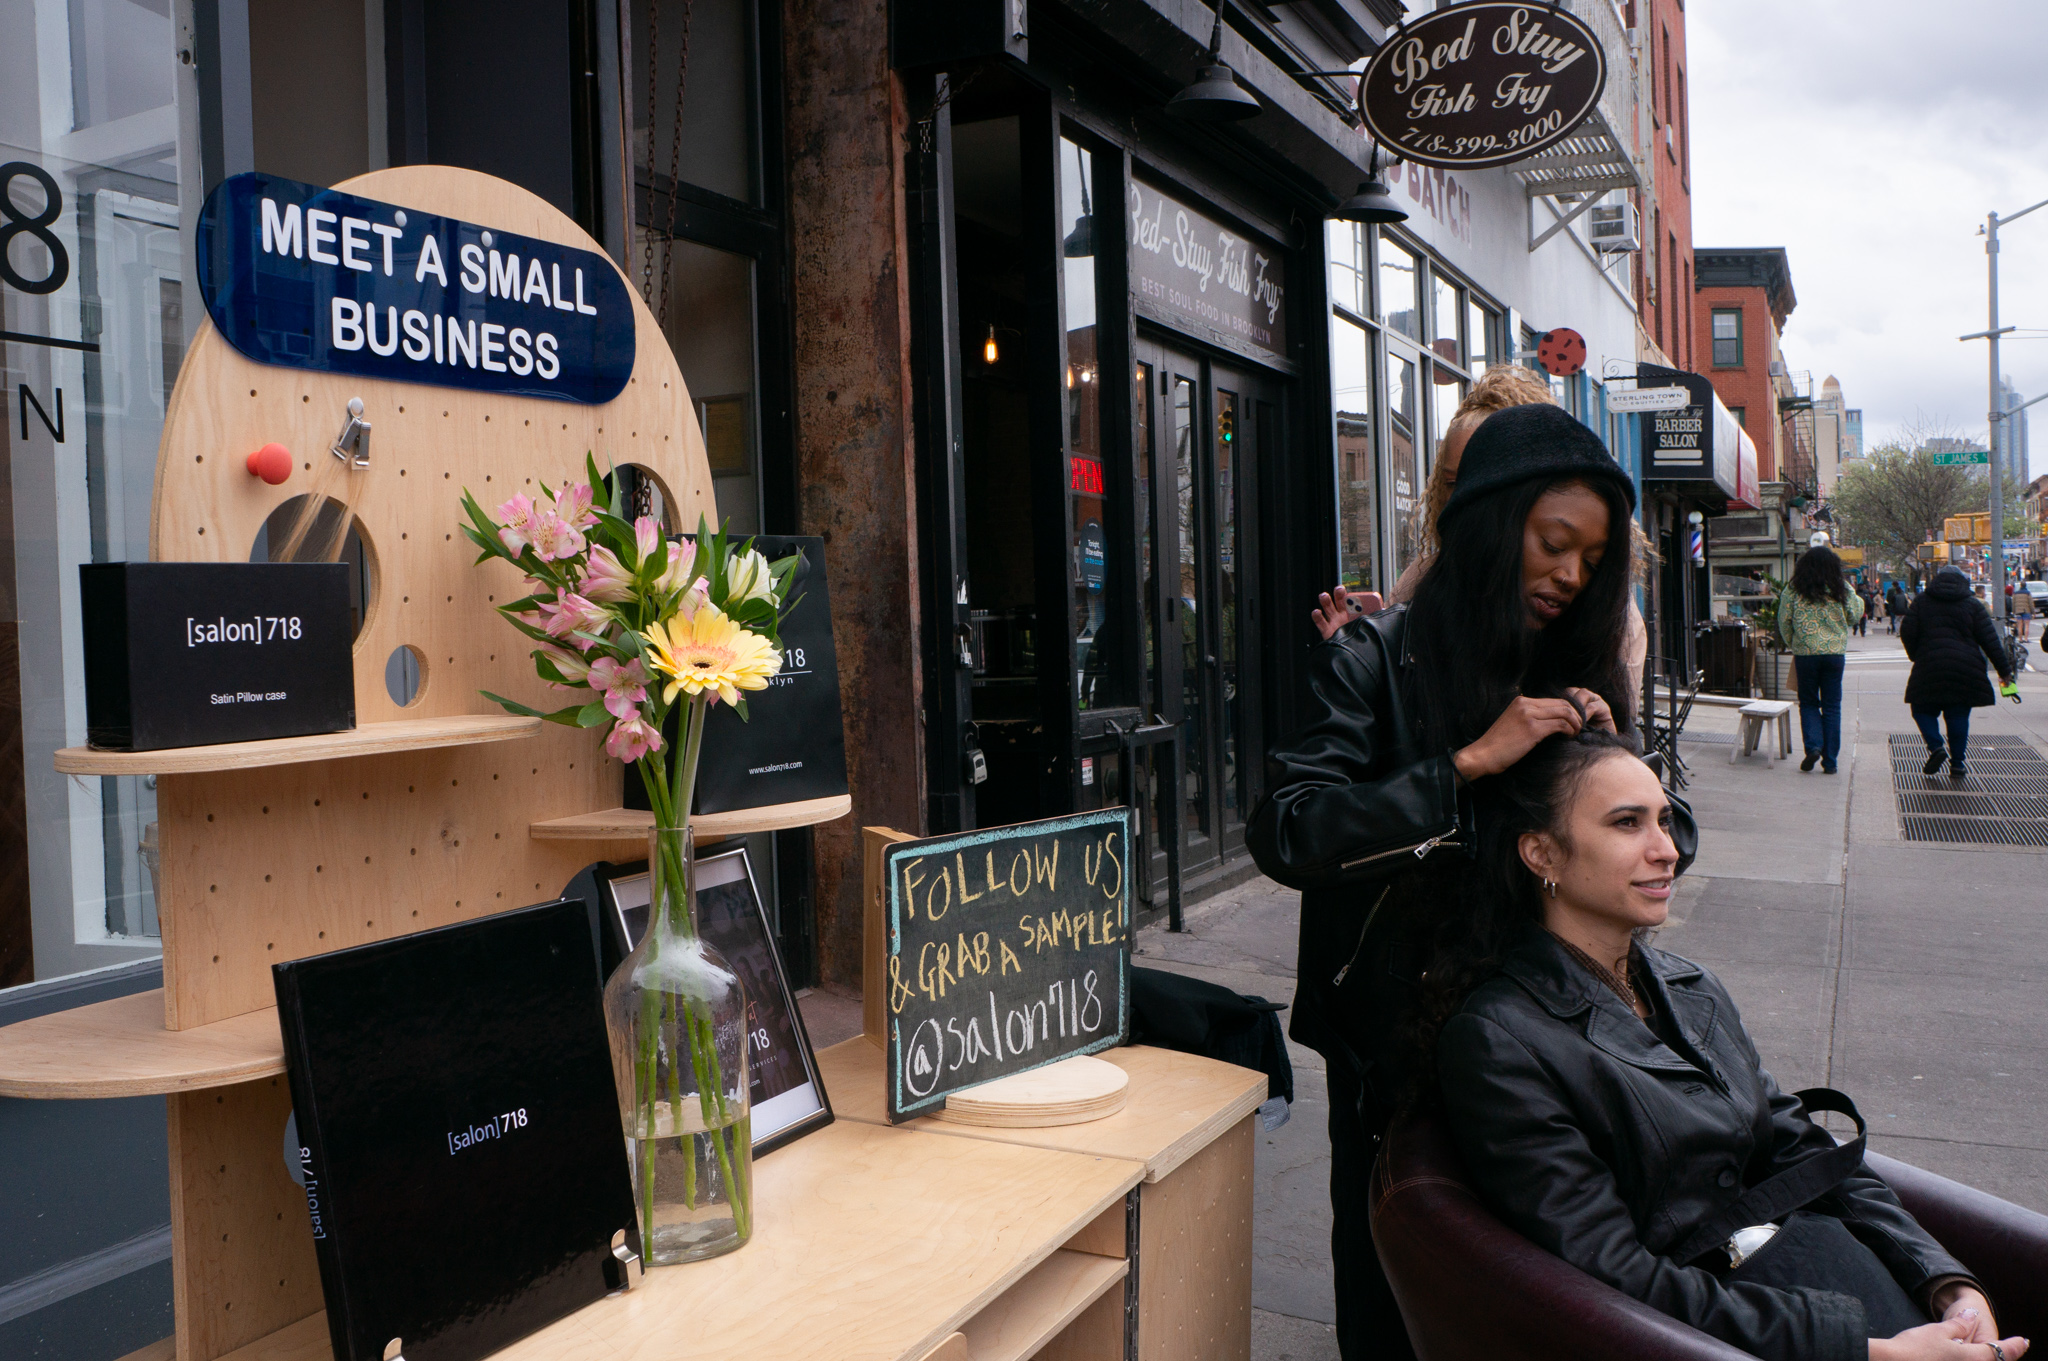 A hair stylist demonstrating a braiding session on the street in front of the storefront.